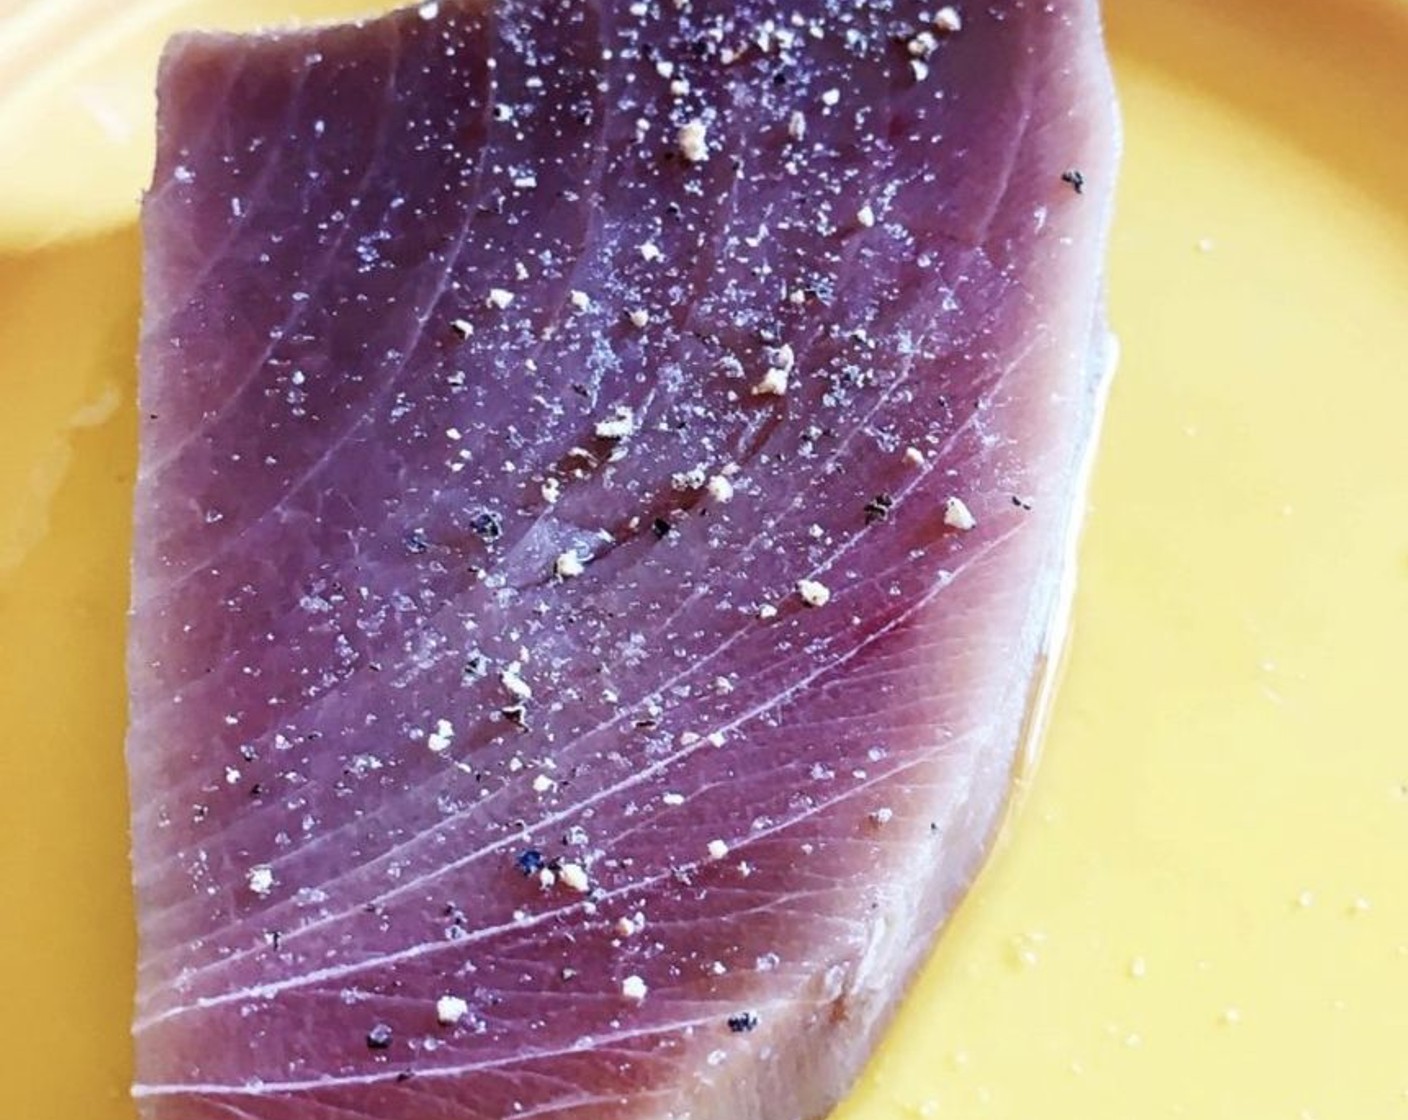 step 4 Season the Fresh Tuna Steak (2) with Himalayan Rock Salt (to taste) and Ground Black Pepper (to taste). Cook them on a hot grill or grill pan for about 2 minutes per side, or less if you like it more on the rare side!